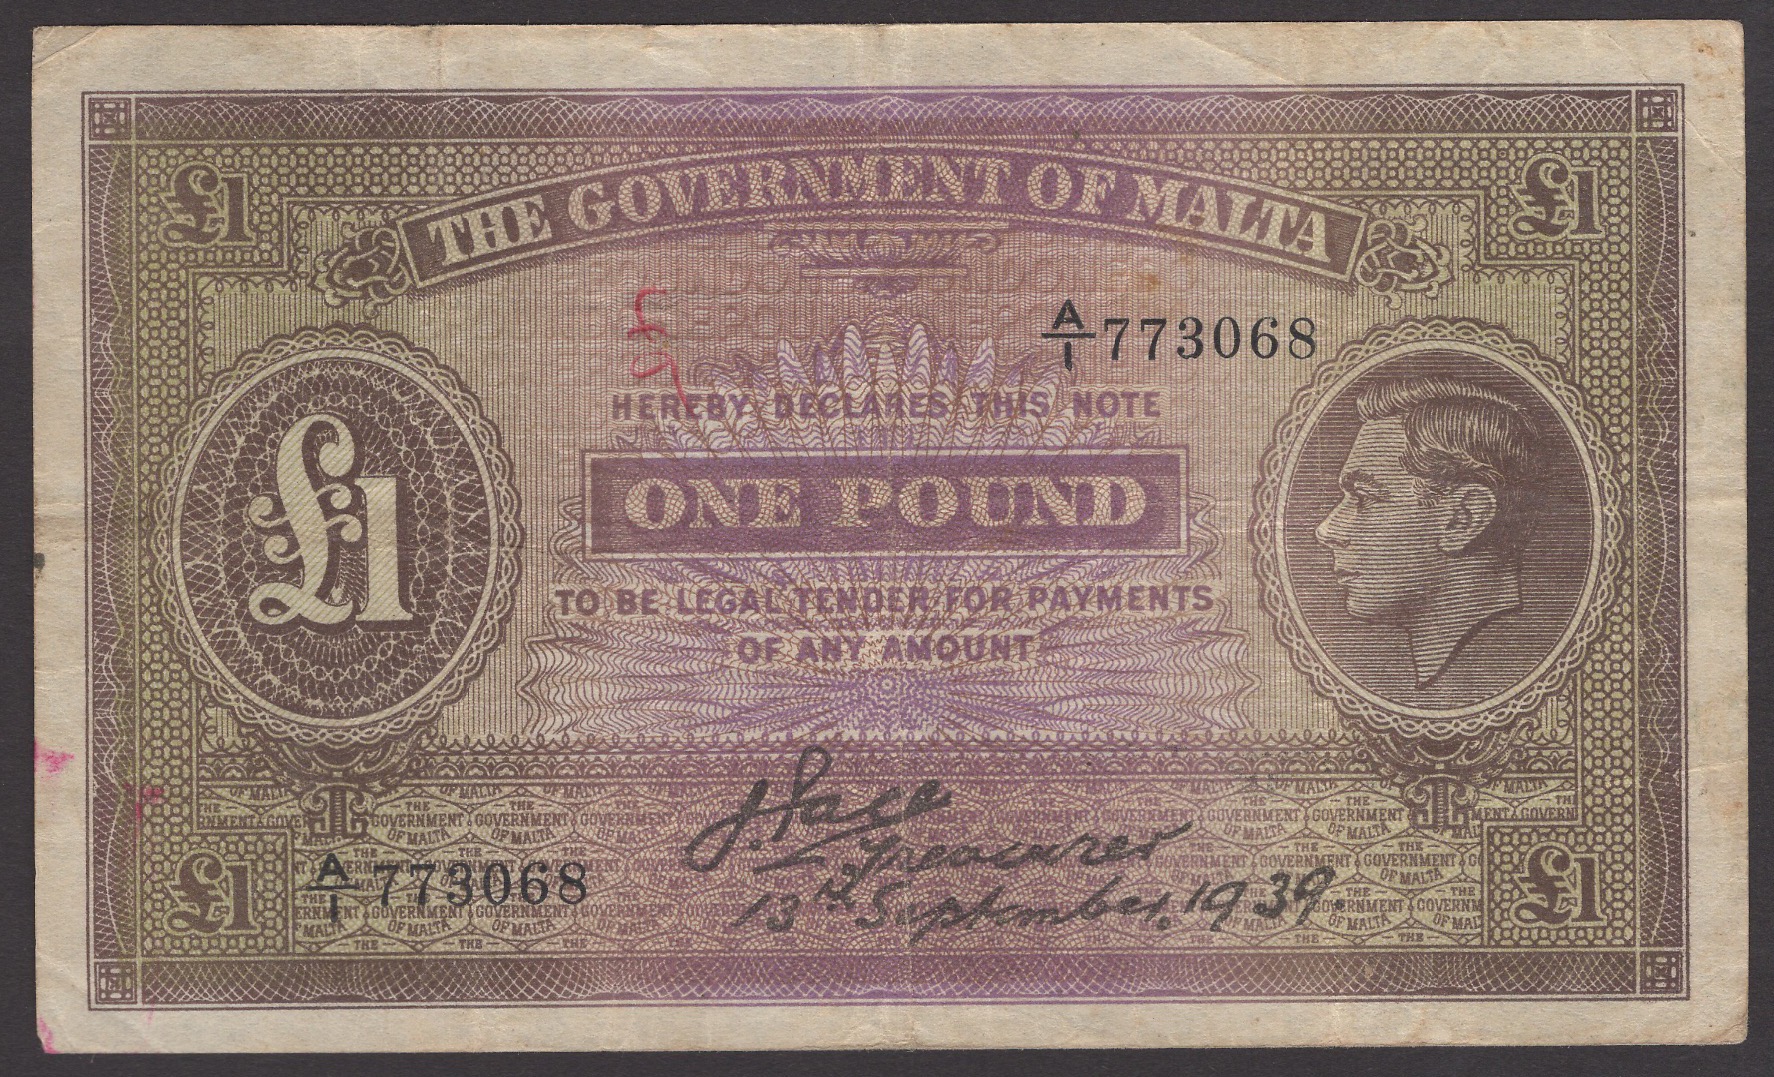 Government of Malta, 2 Shillings and 6 Pence, 5 Shillings, 10 Shillings and Â£1, all 13... - Image 3 of 4